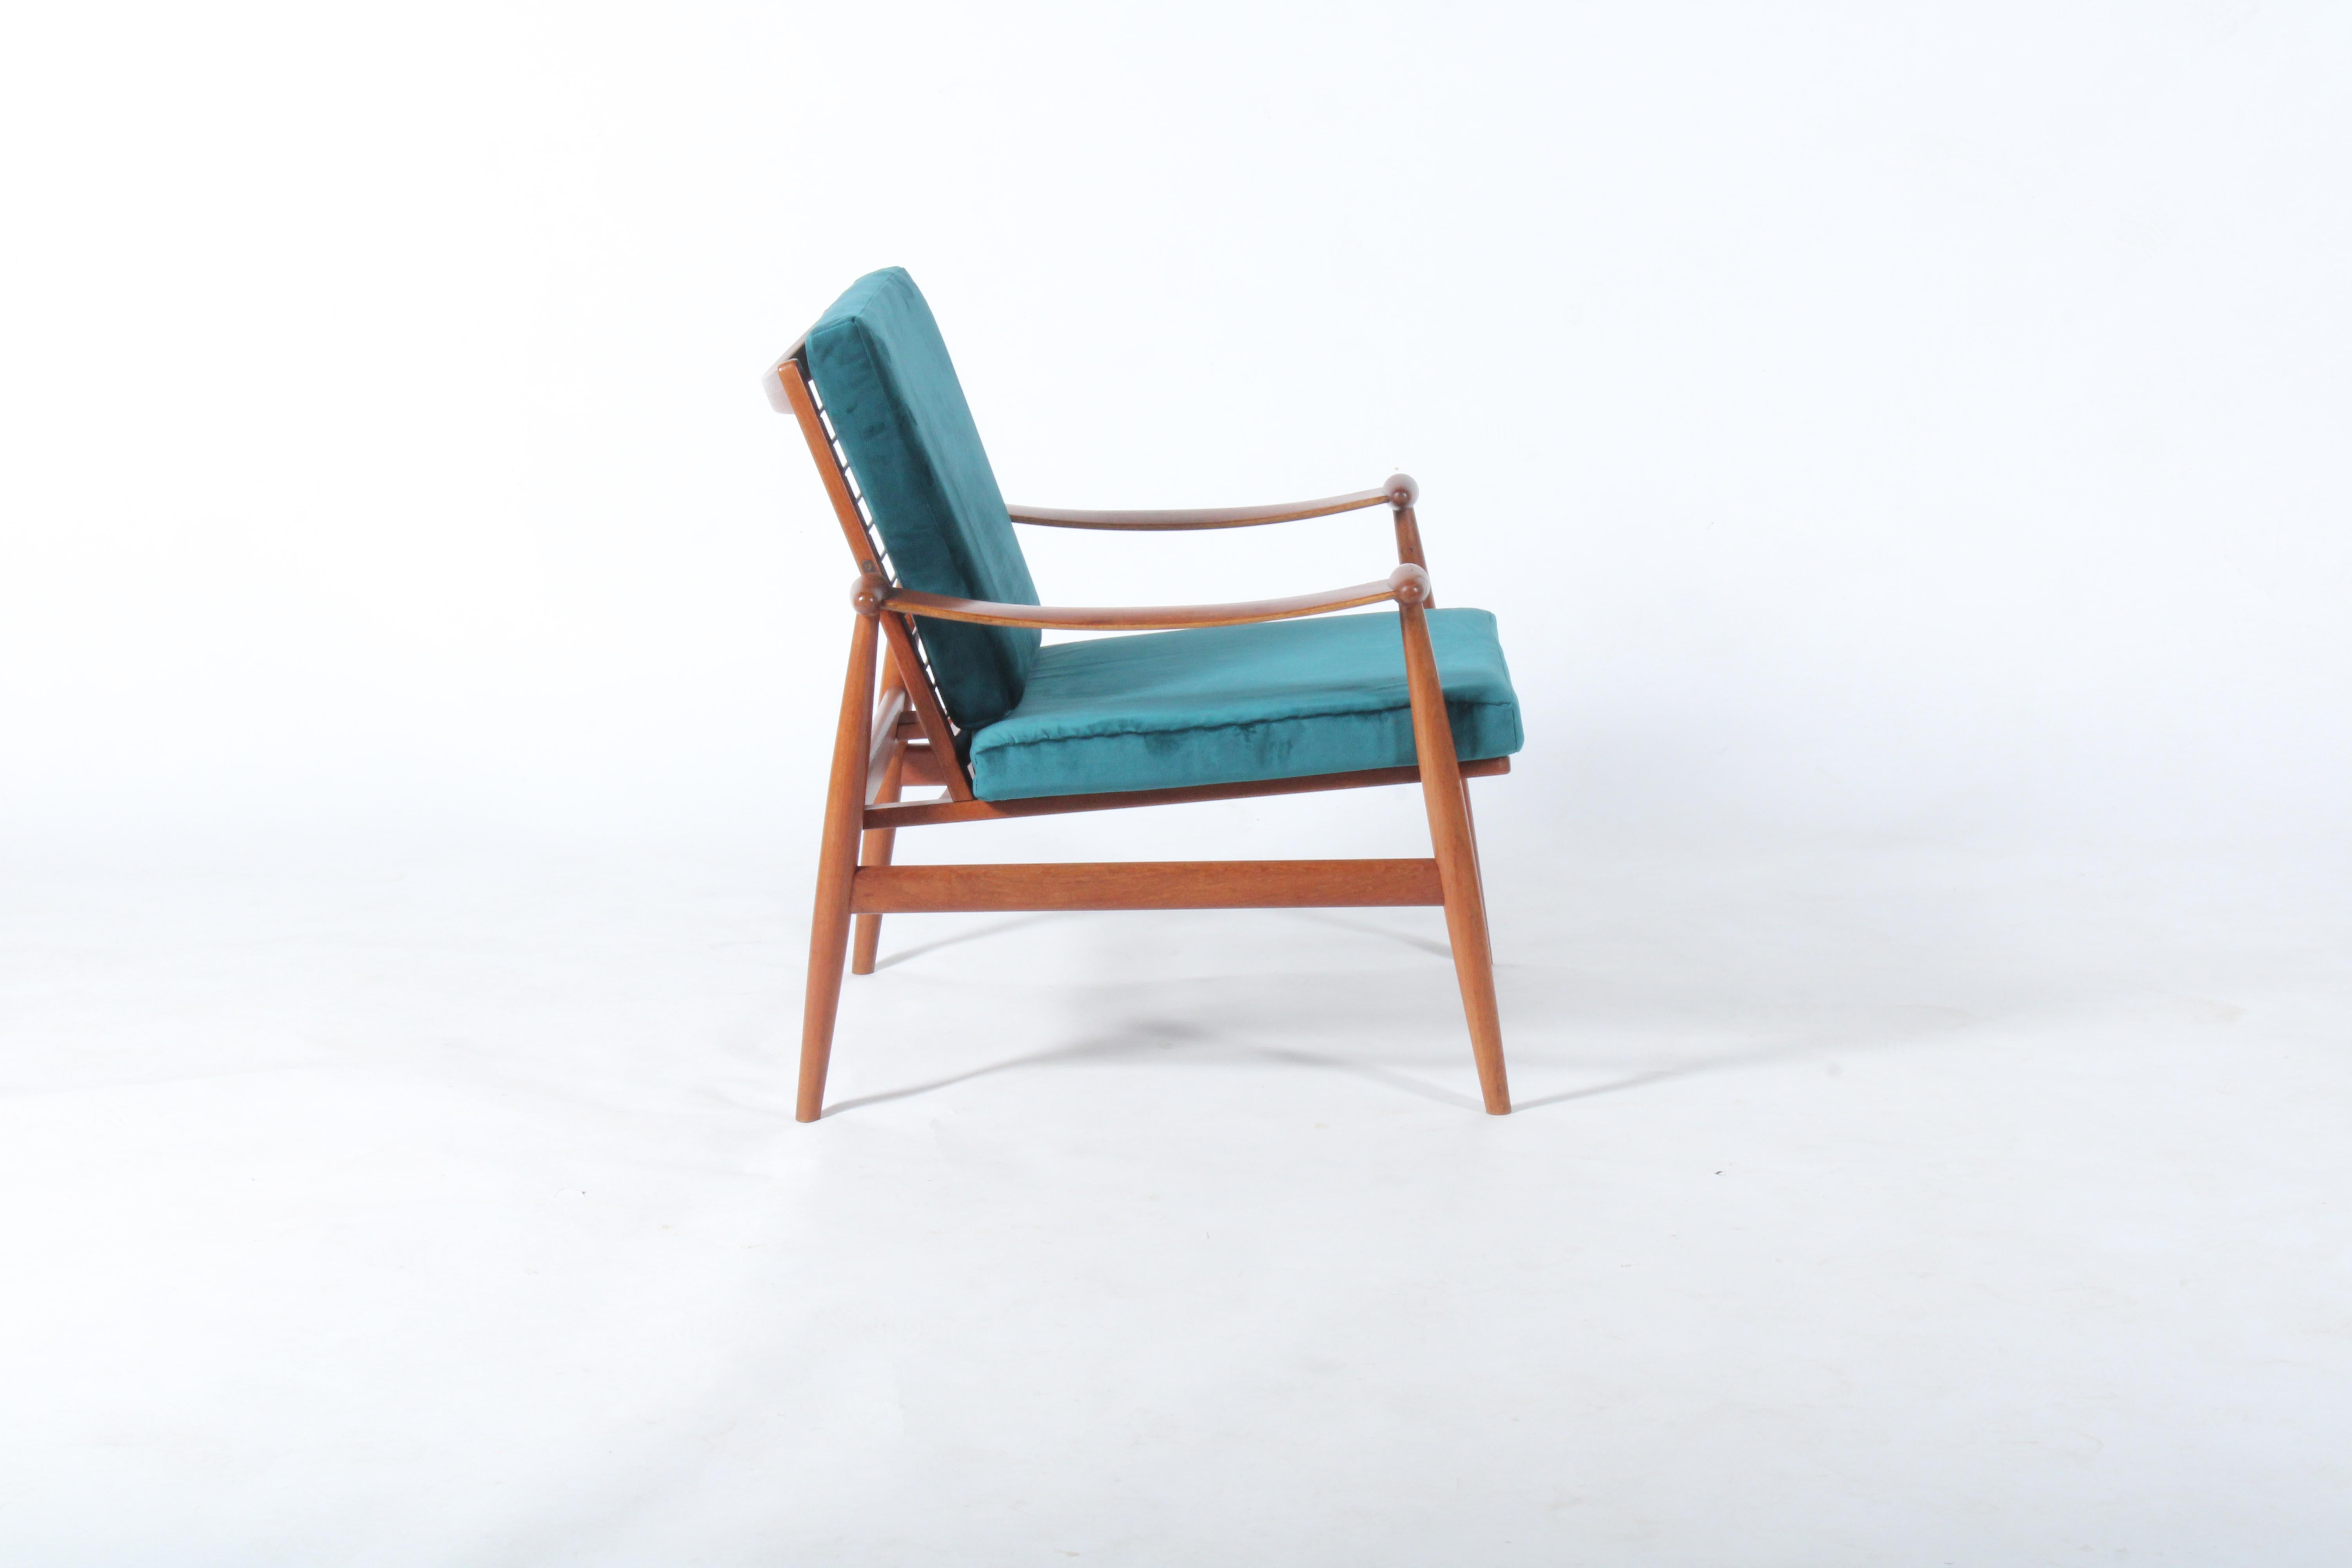 Mid-20th Century Exquisite Mid Century Danish Spade Chair By Finn Juhl For France & Son In Teak For Sale